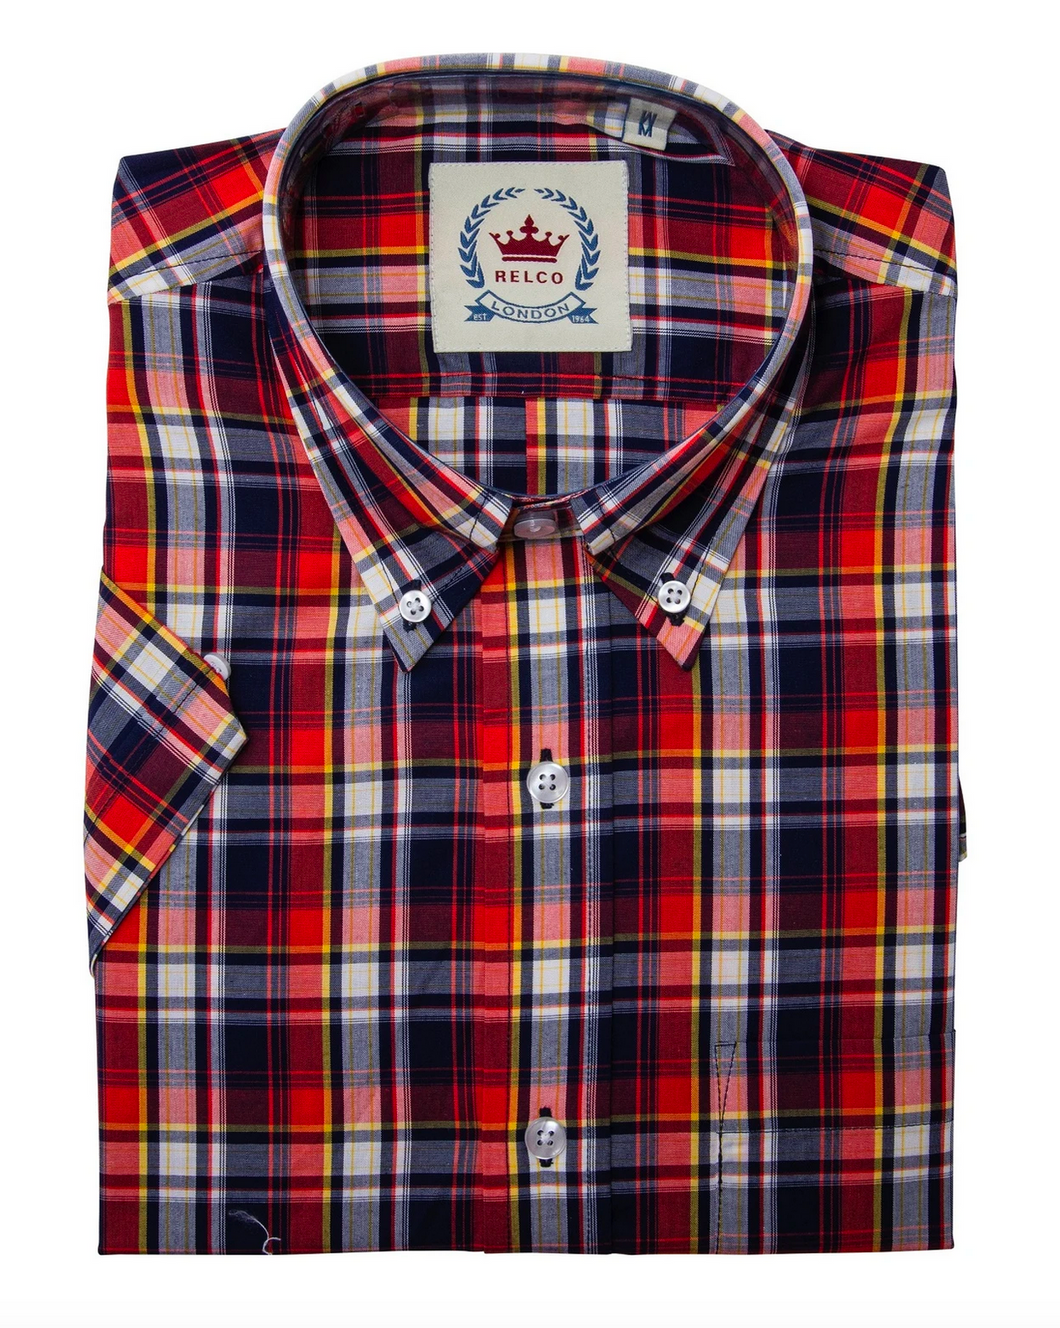 Men's Navy Red Checkered Shirt • Relco